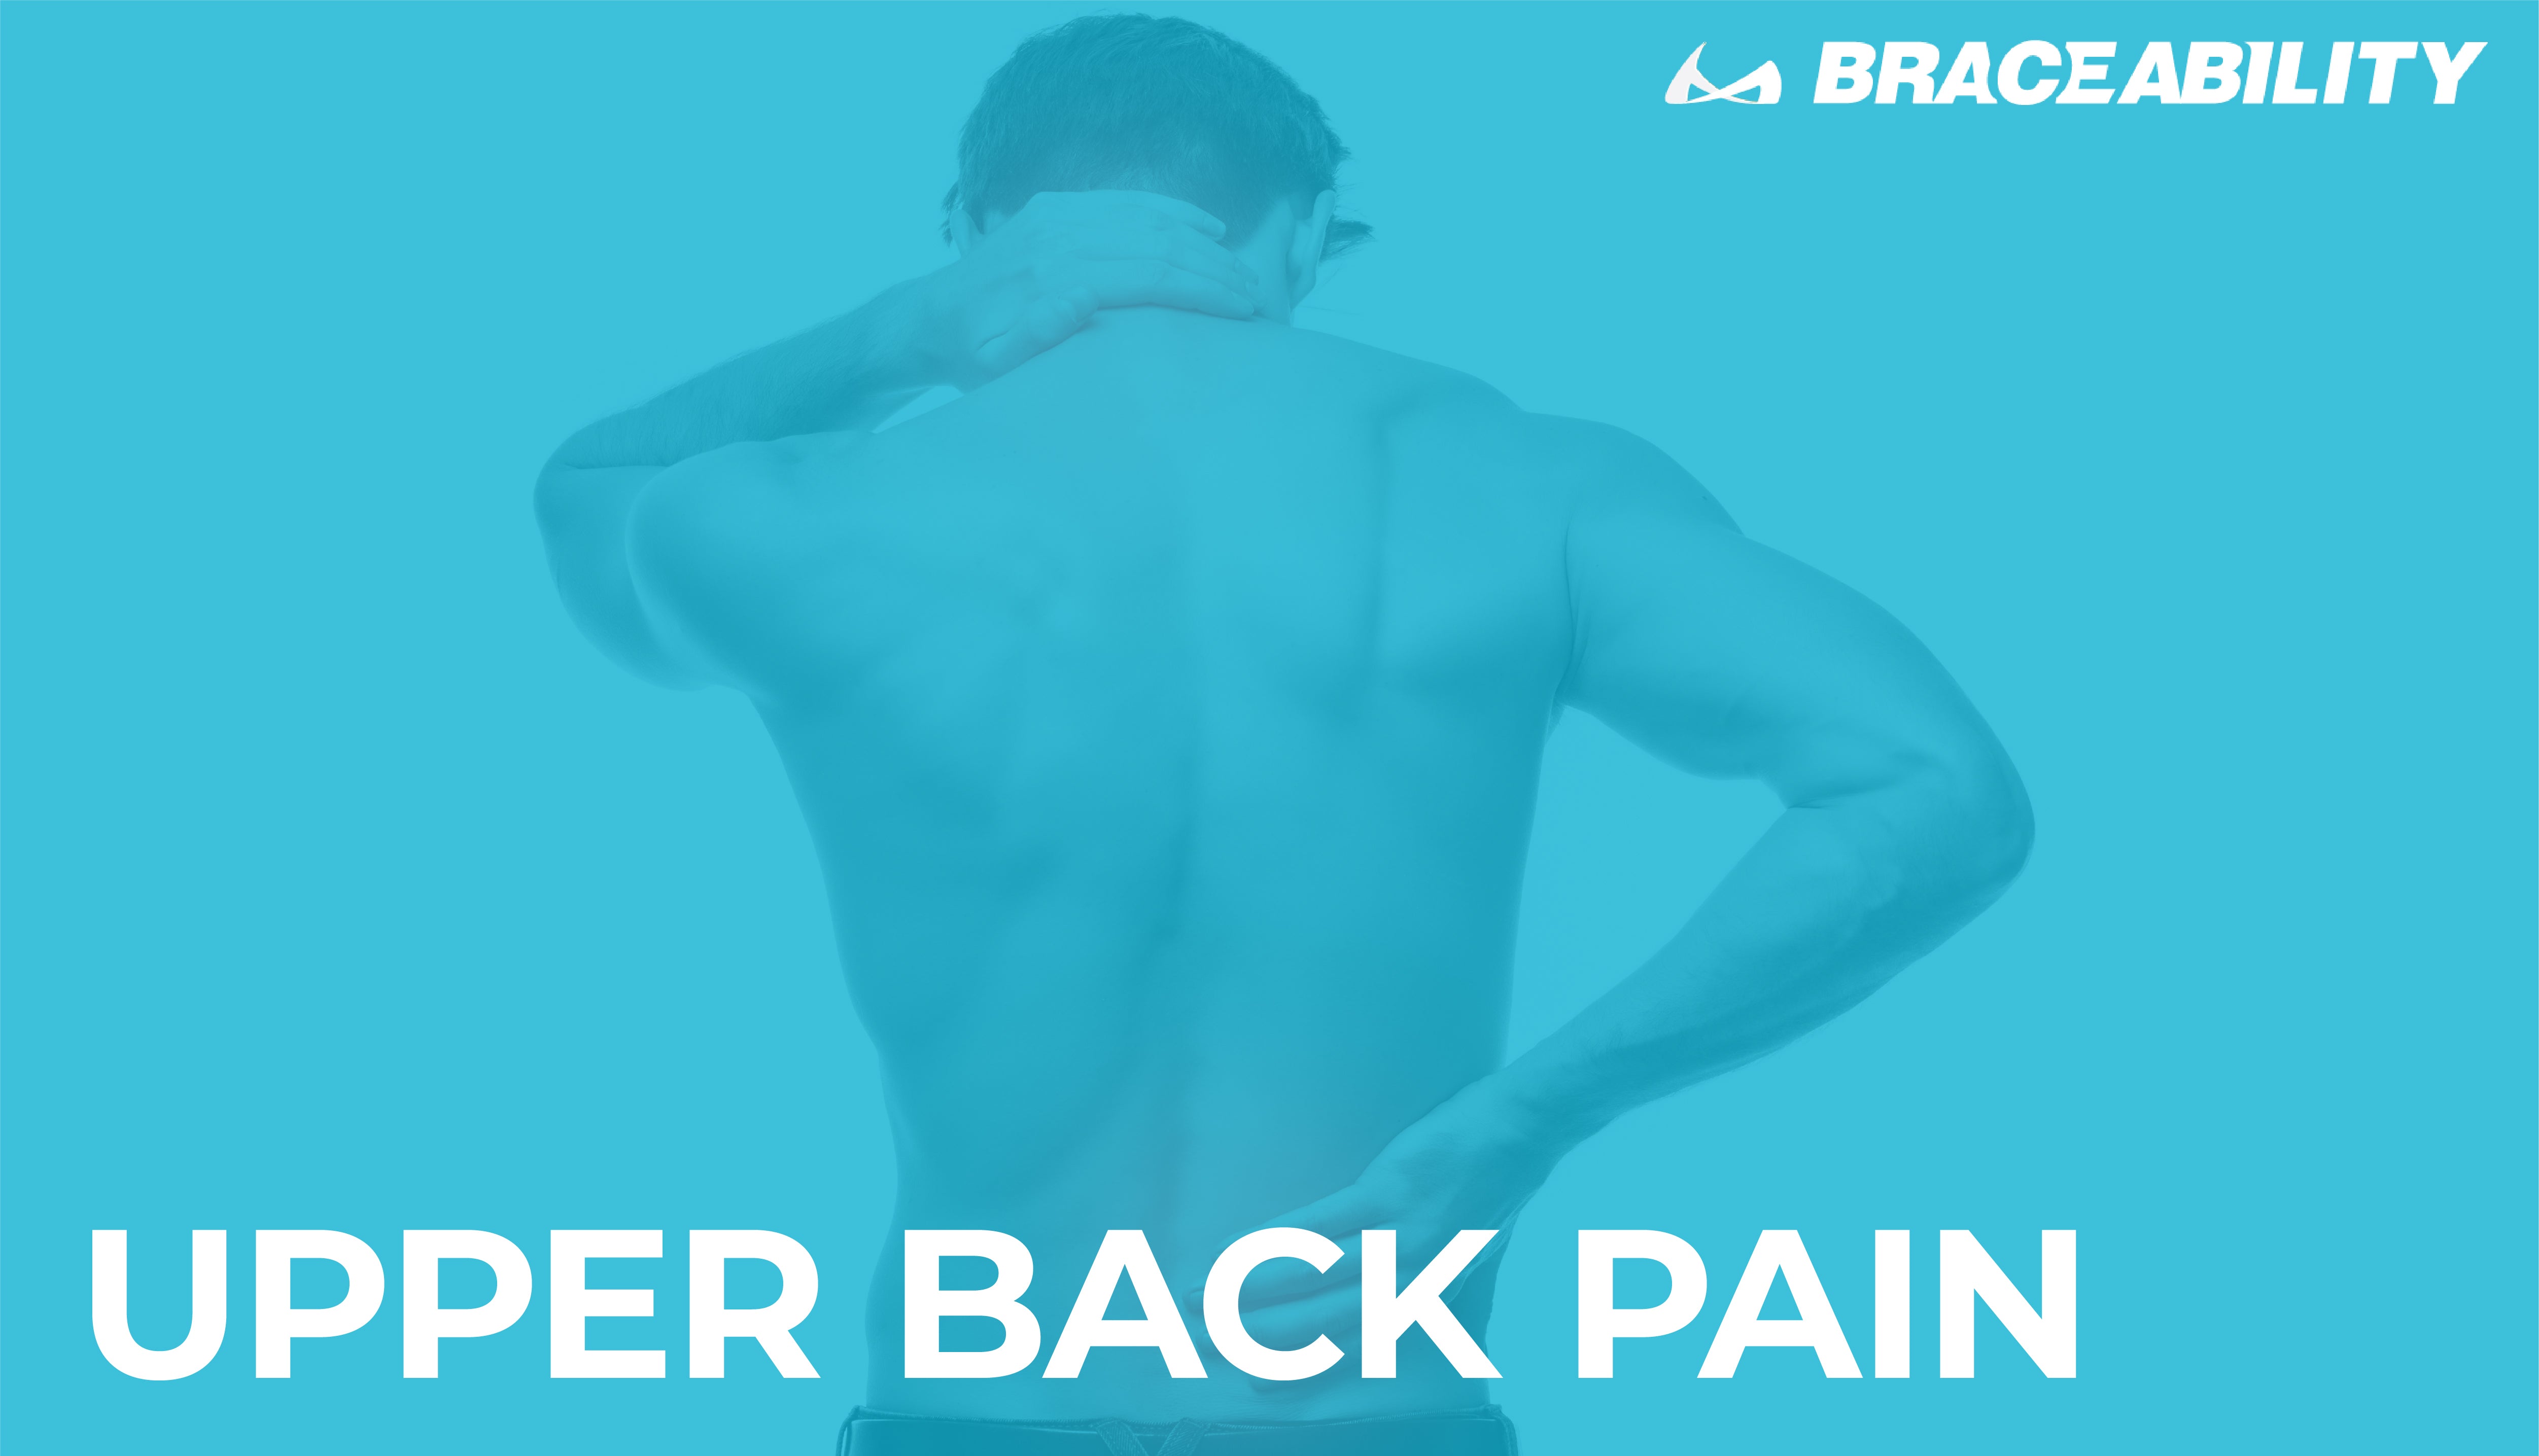 When Should I Take Back Pain Seriously?